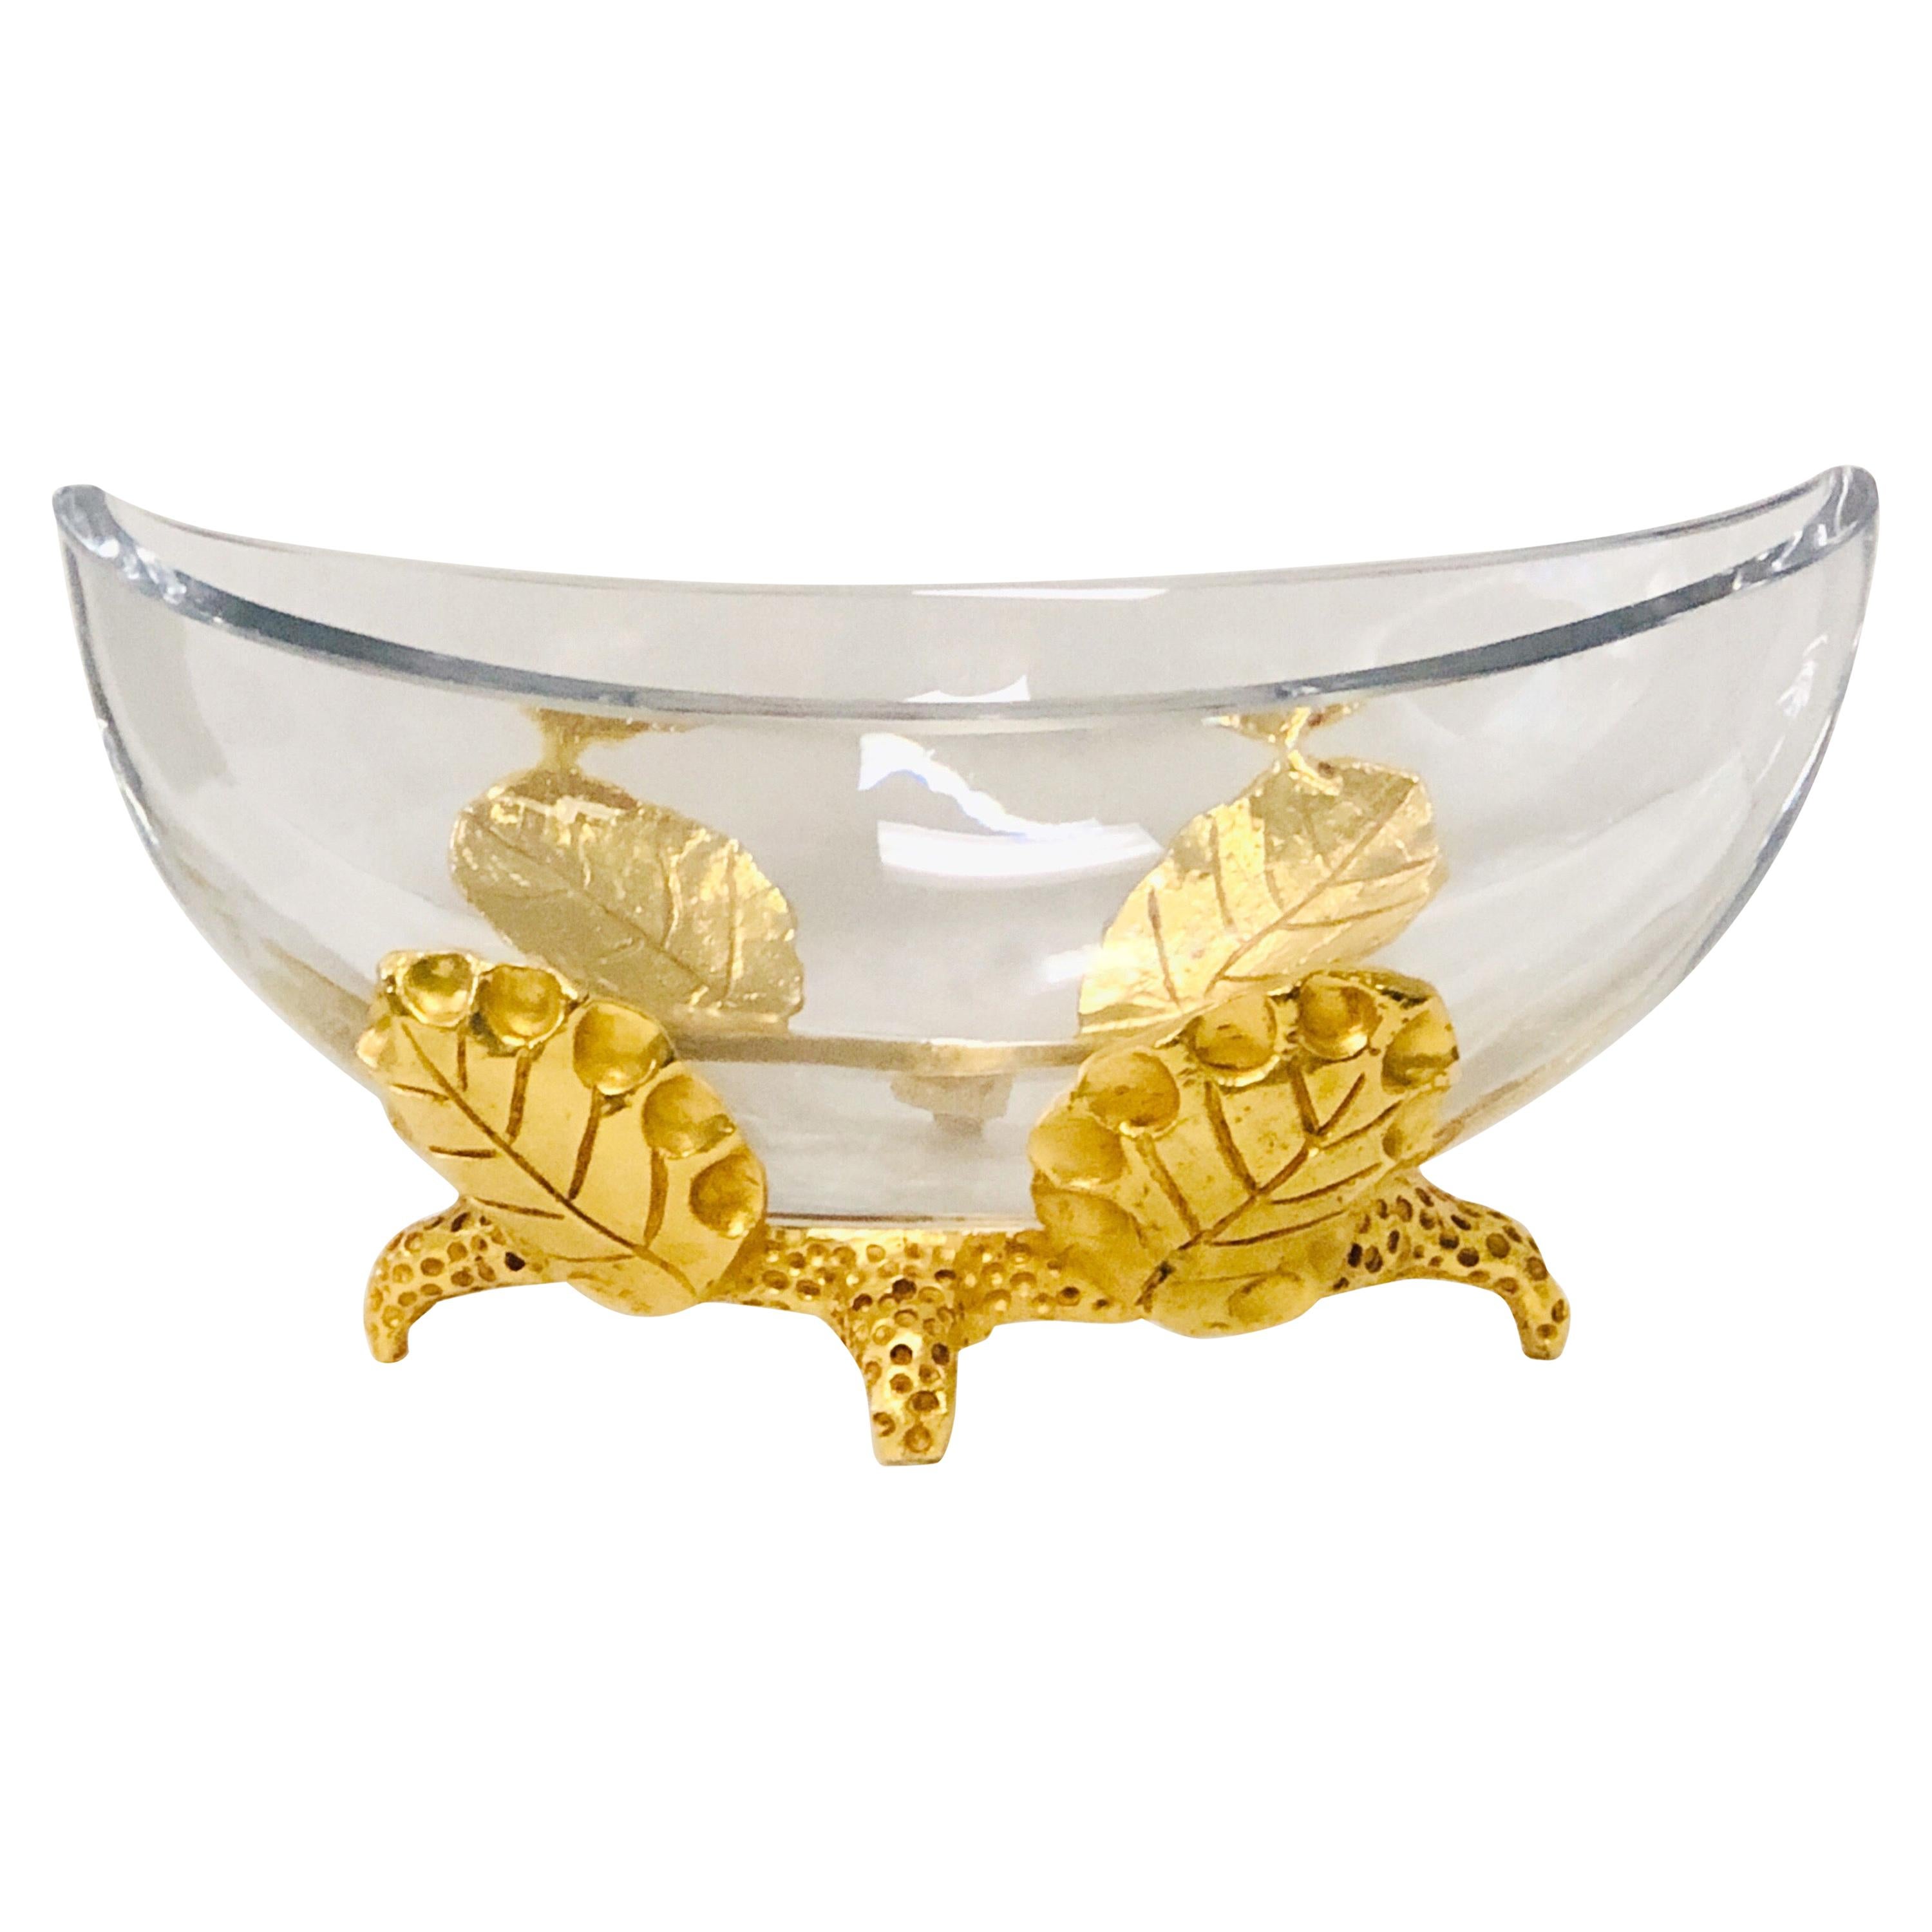 Fondica Bronze and Crystal Large  Bowl Centerpiece by Mathias